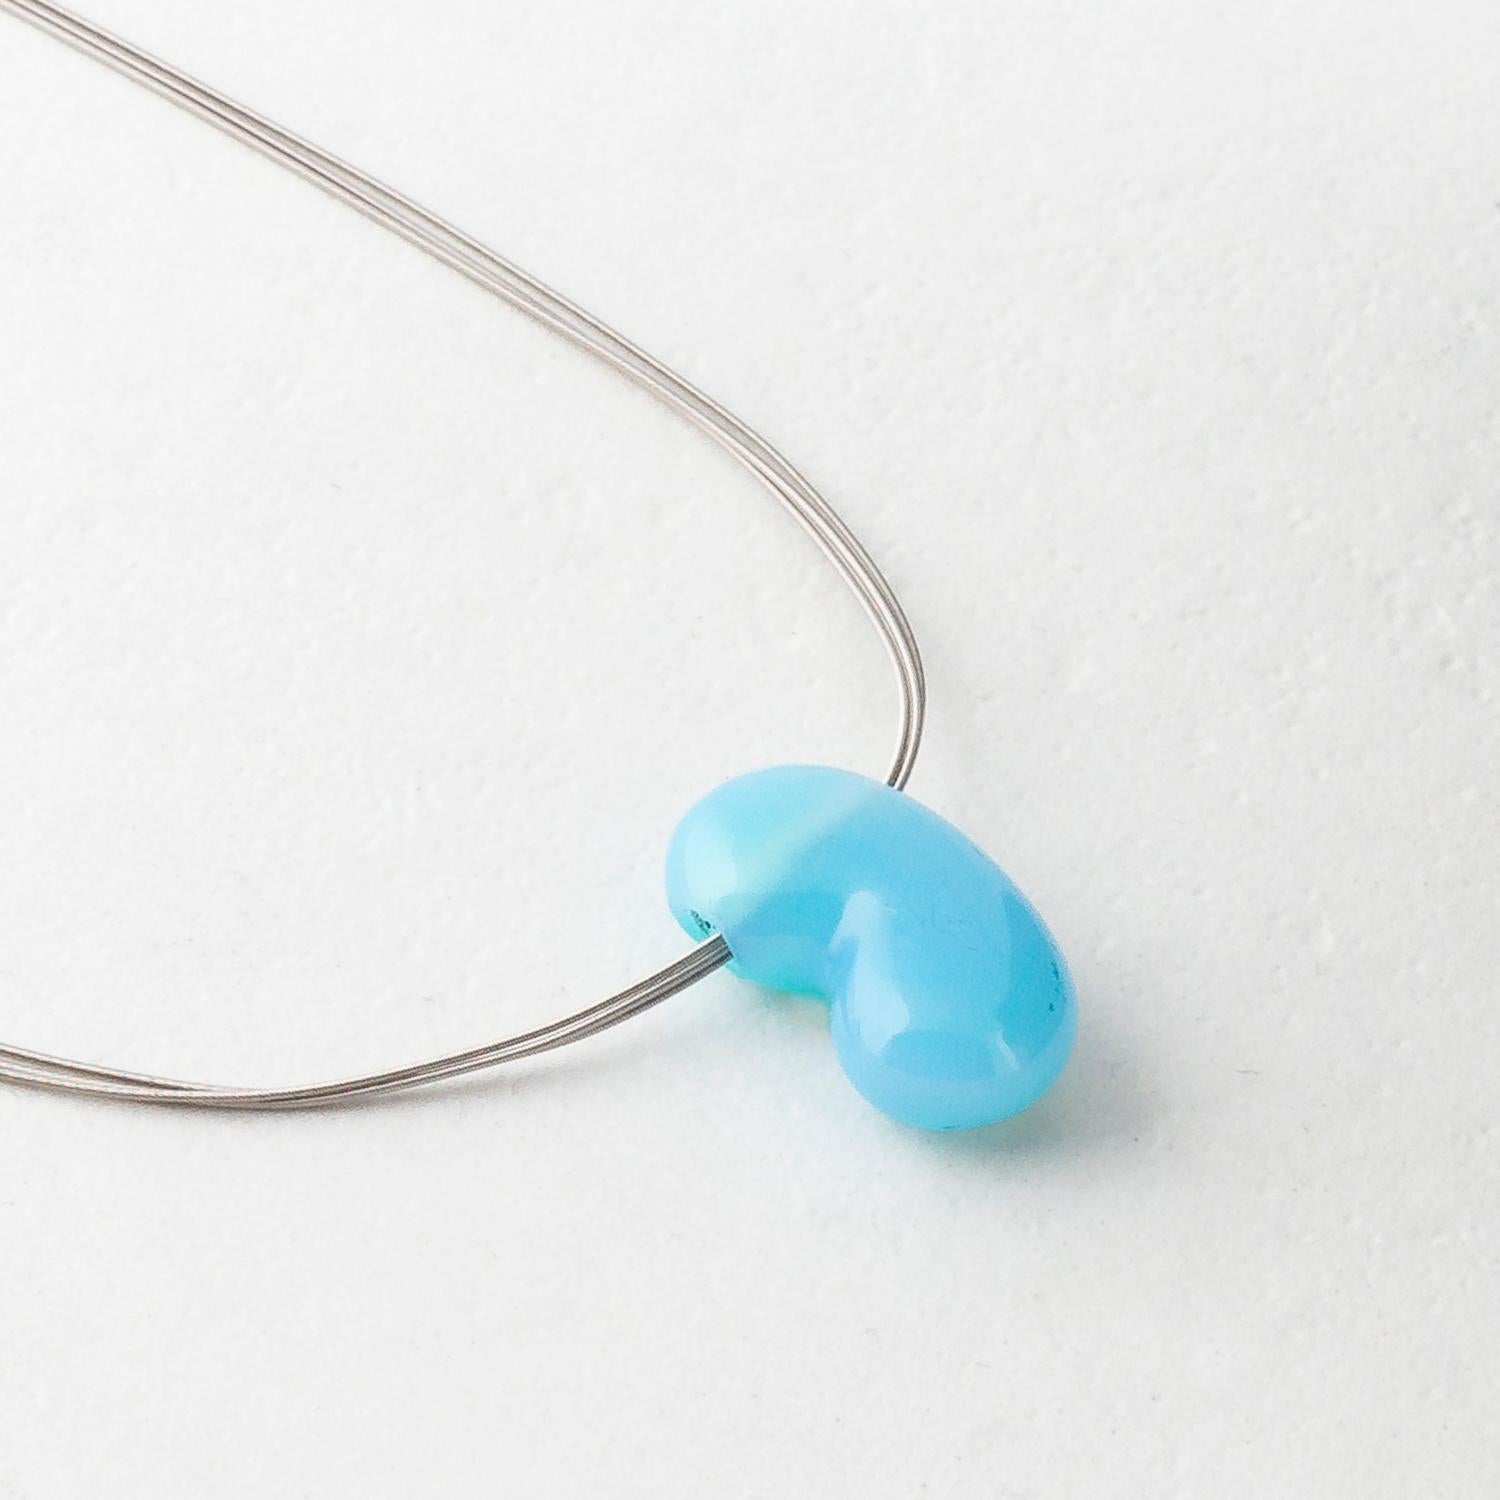 Handcarved by Dieter Lorenz, one of the top names in contemporary gem-carving, this turquoise agate jellybean pendant is hung on an 18 Karat White Gold multi strand necklace.

Made by hand in our family run Northern Irish jewellery workshop.